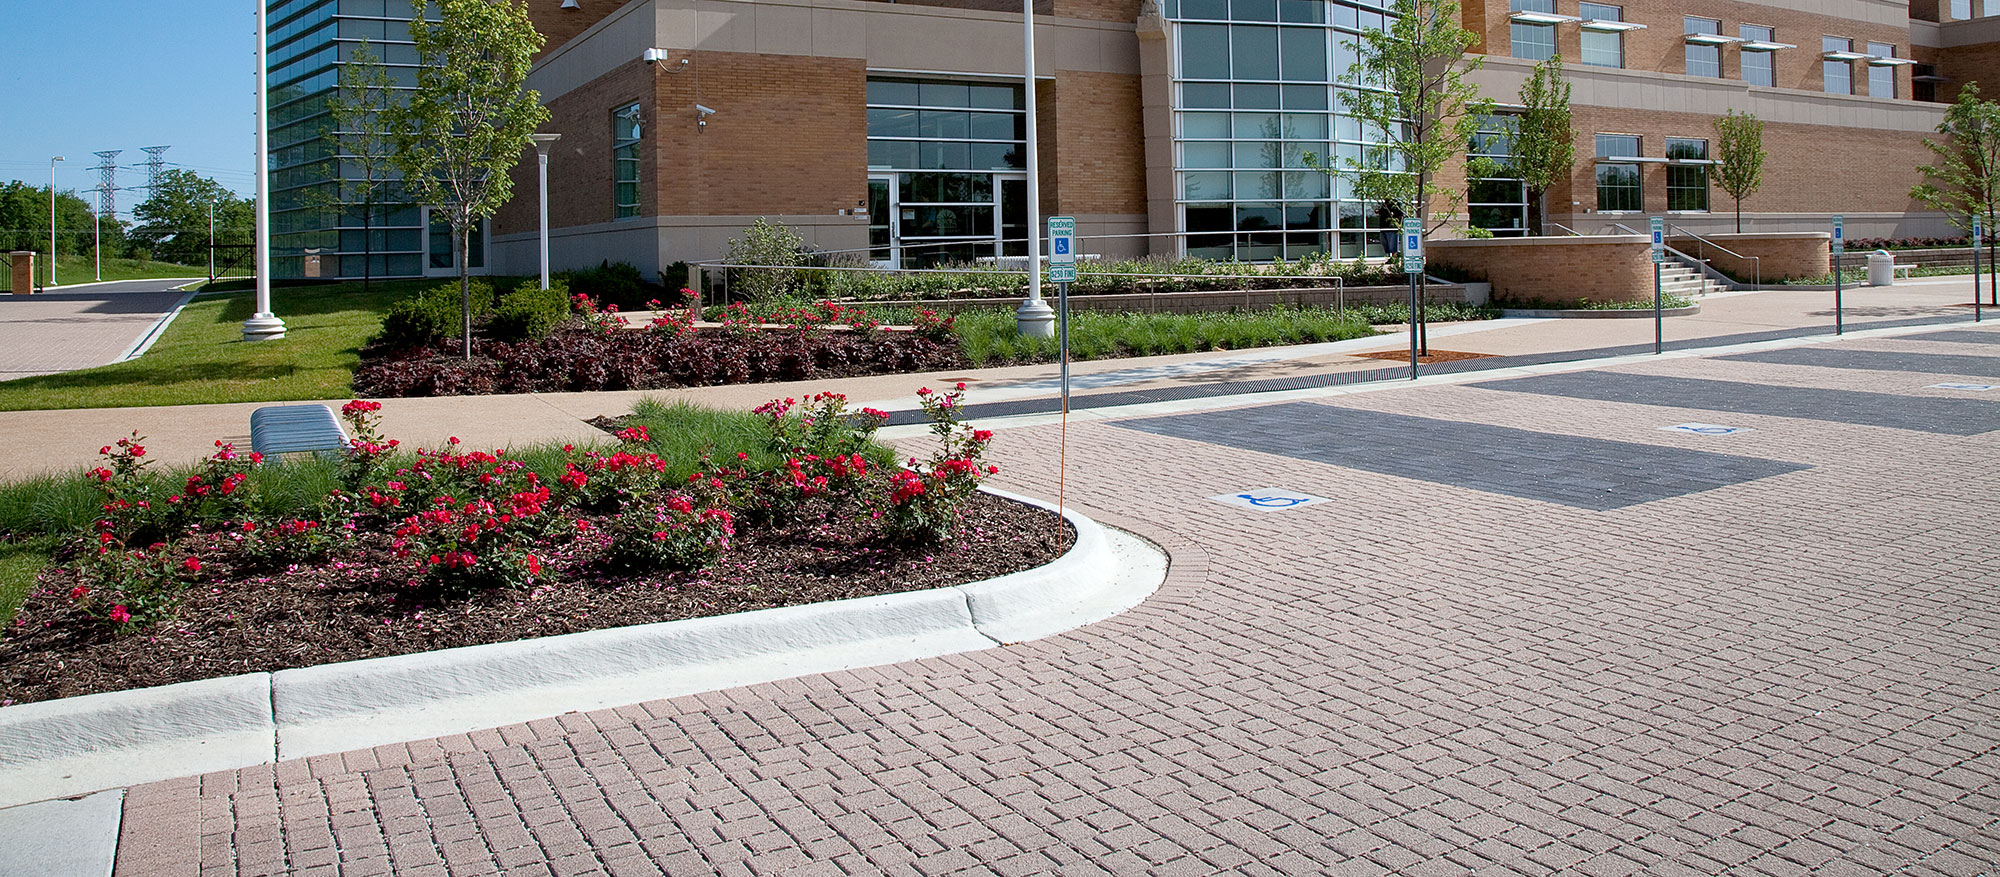 The landscaped parking lot in front of the Aurora police station is paved with Eco-Optiloc in contrasting colors to delineate parking spots.